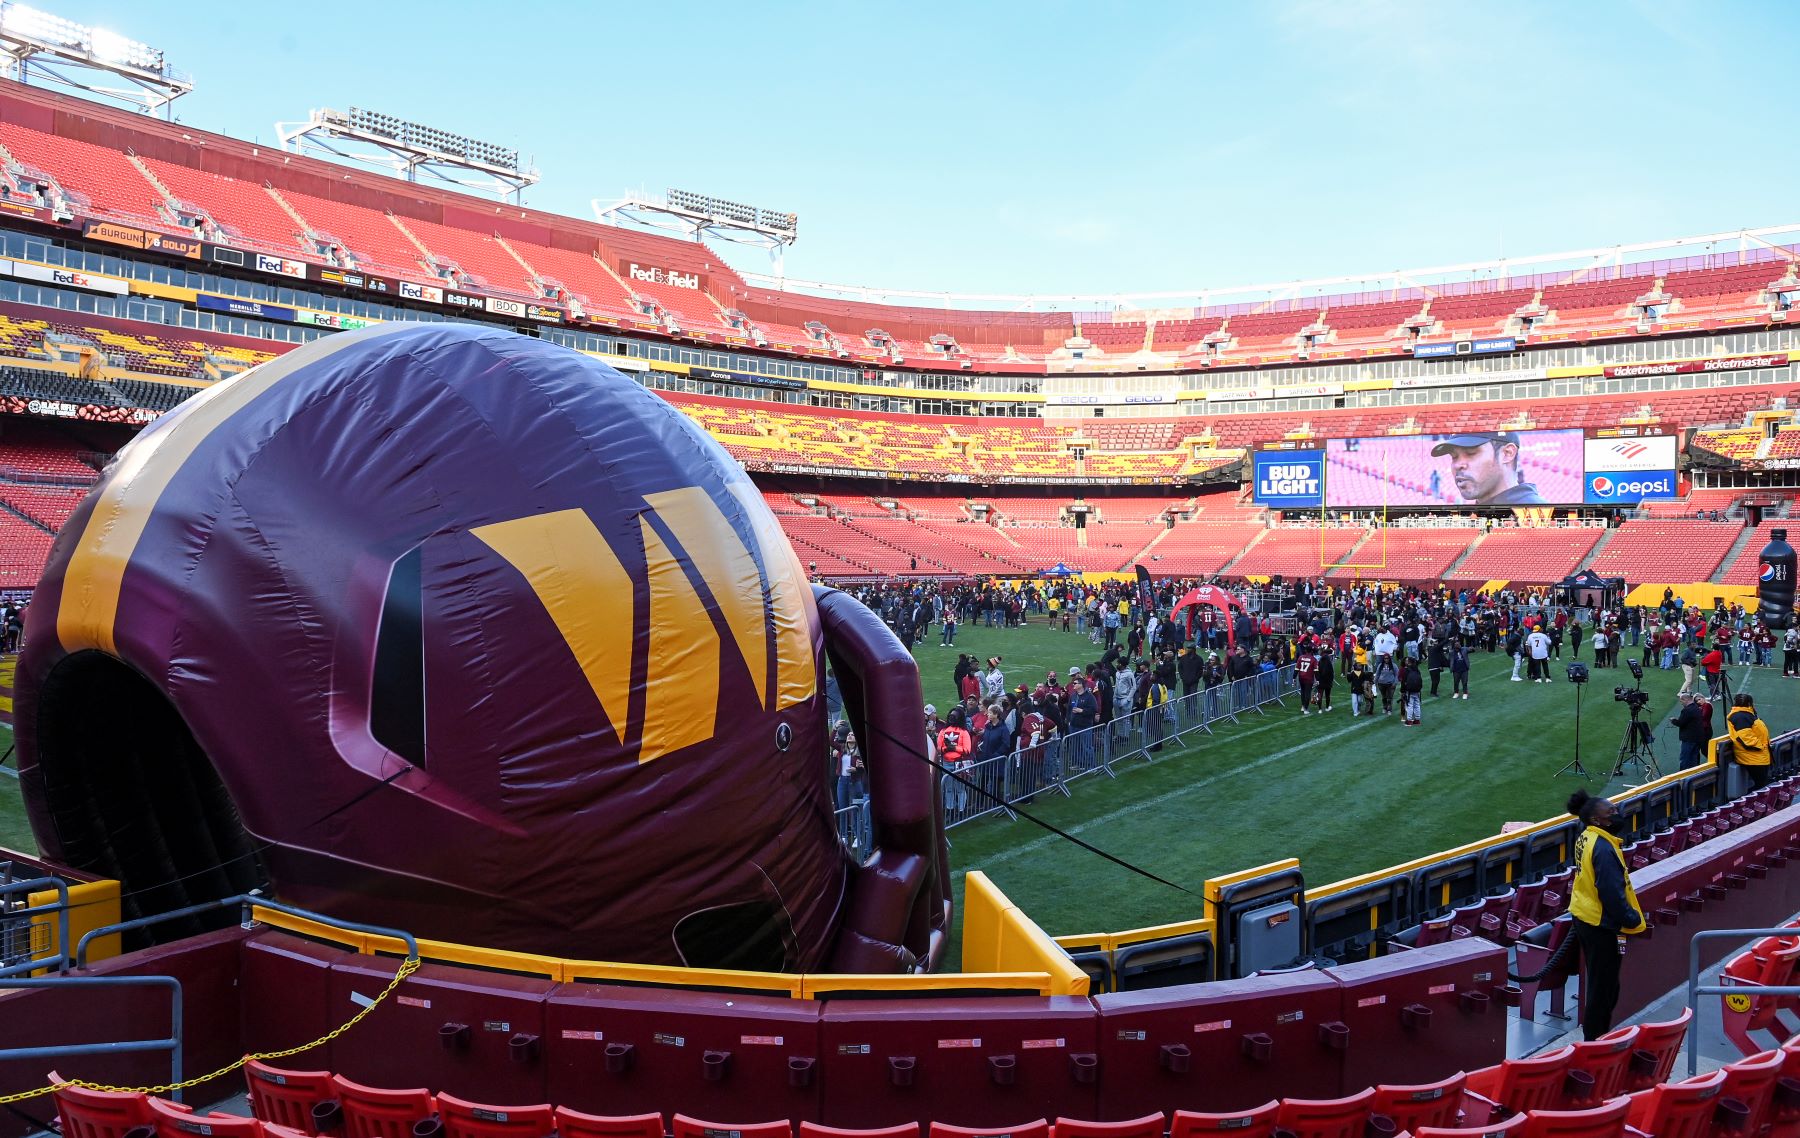 The Washington Commanders NFL football team holding a draft party at the FedEx Field in Landover, Maryland